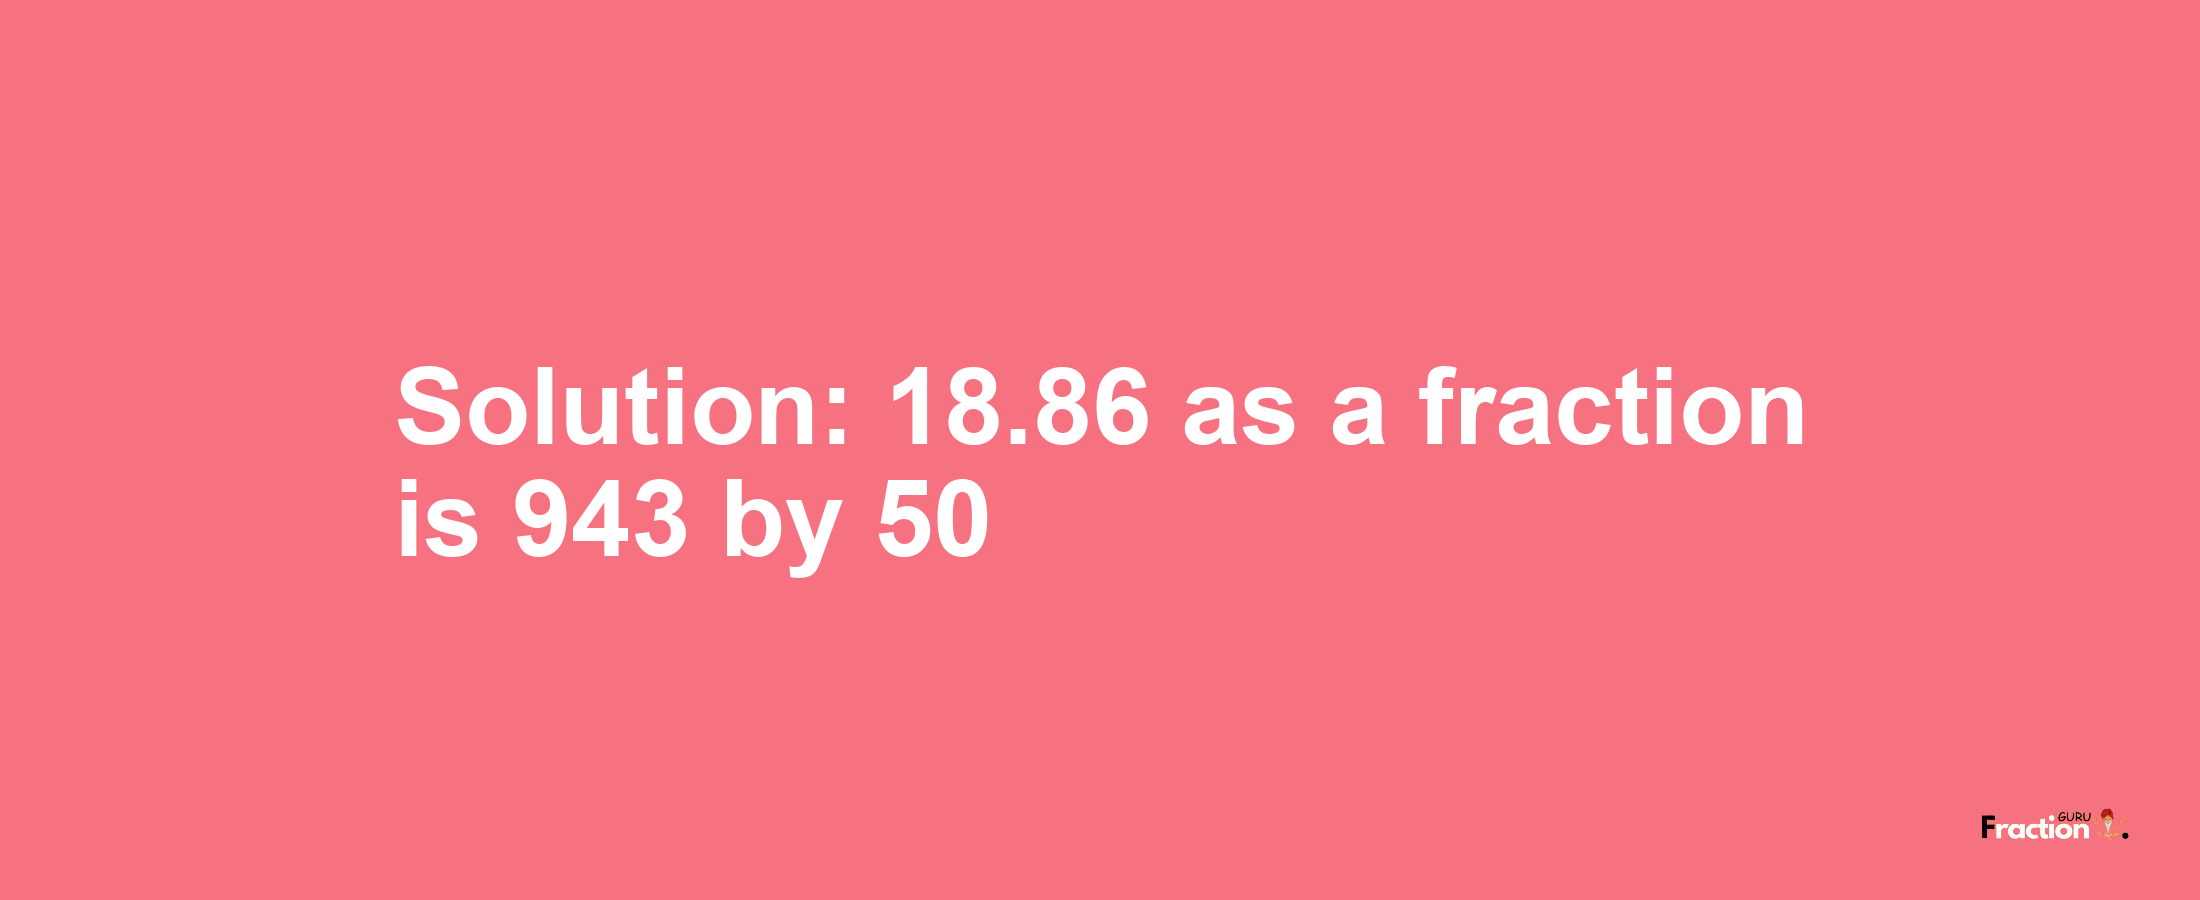 Solution:18.86 as a fraction is 943/50